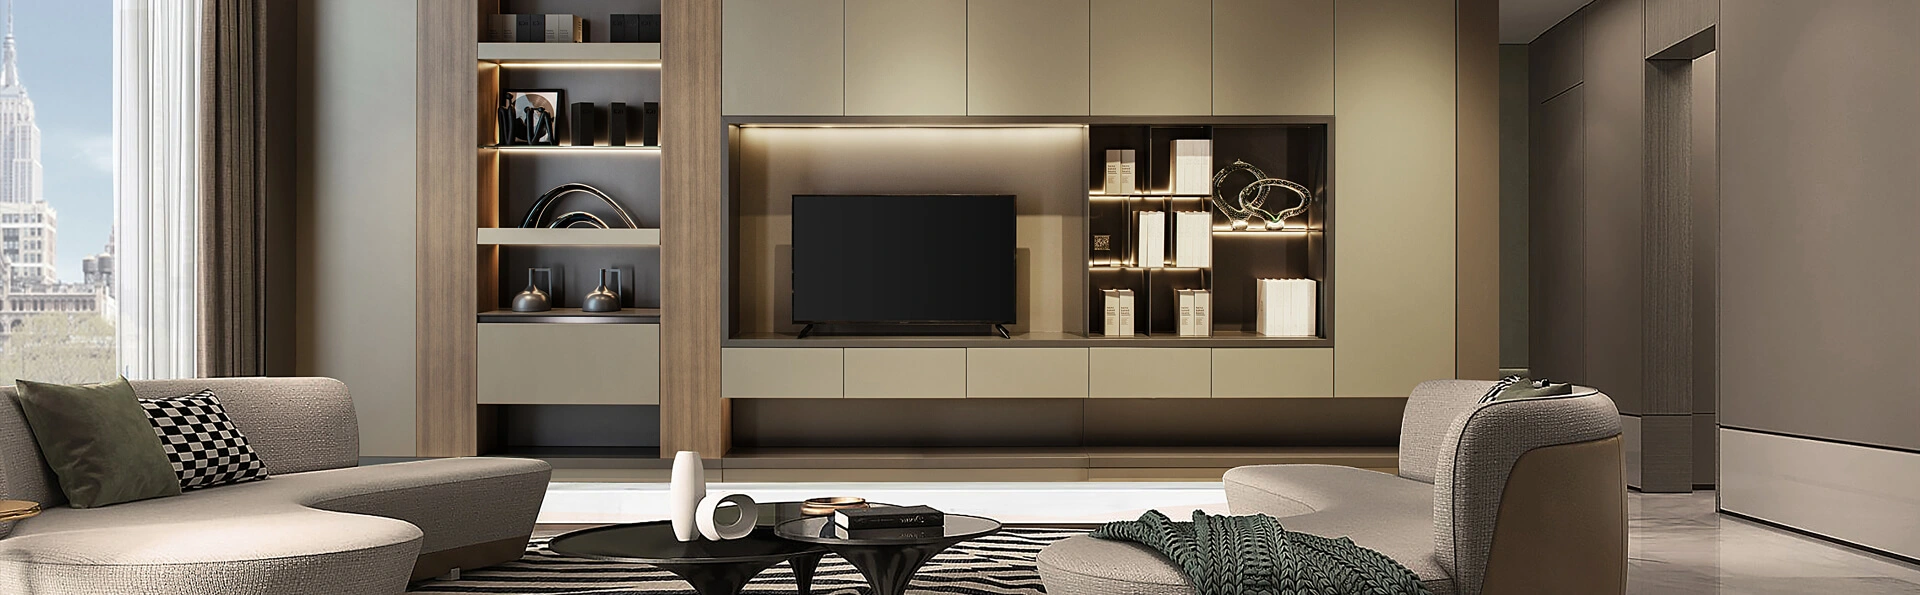 Application Scenario of Stainless Steel TV Cabinet